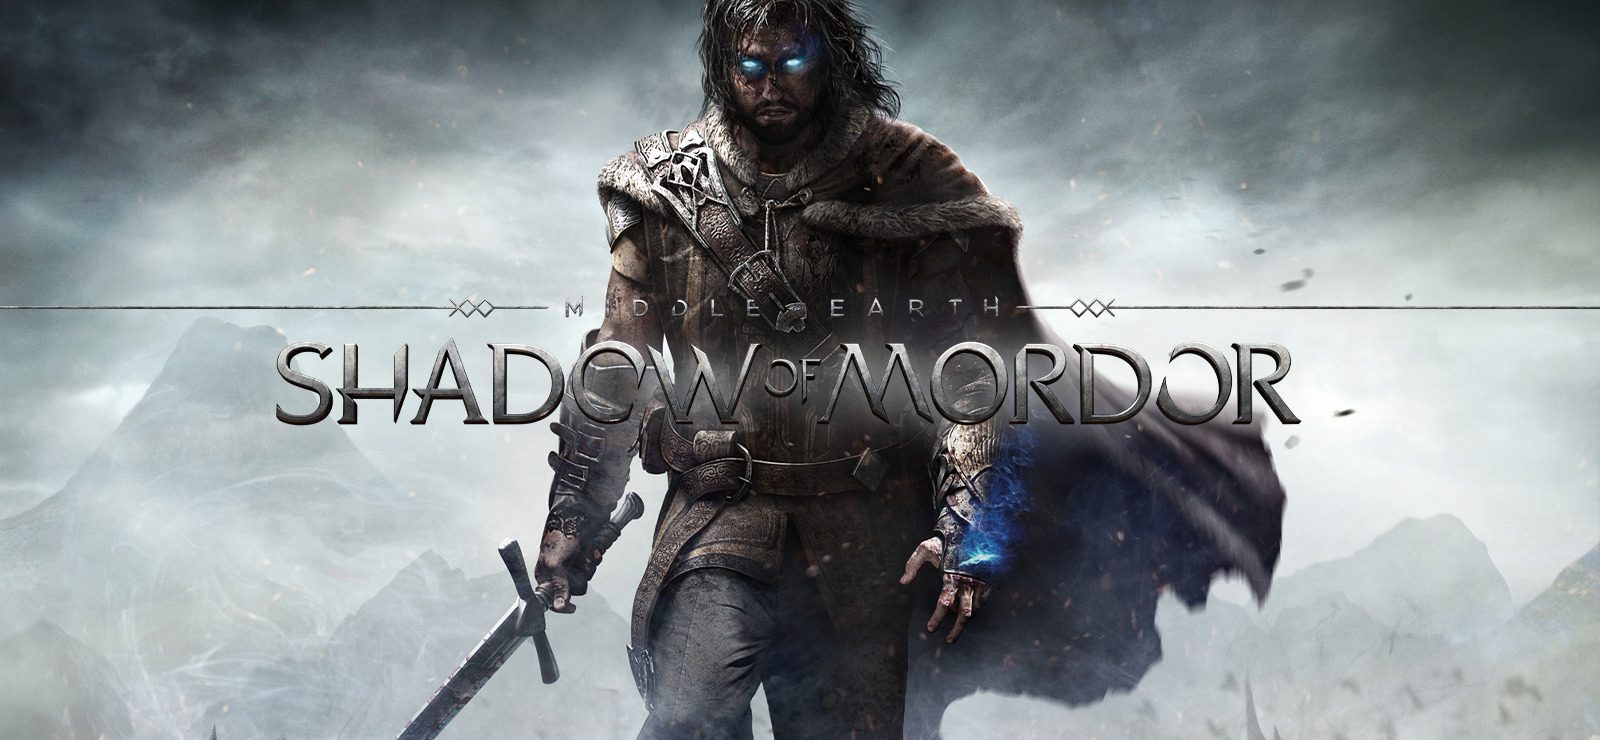 Middle Earth: Shadows of Mordor